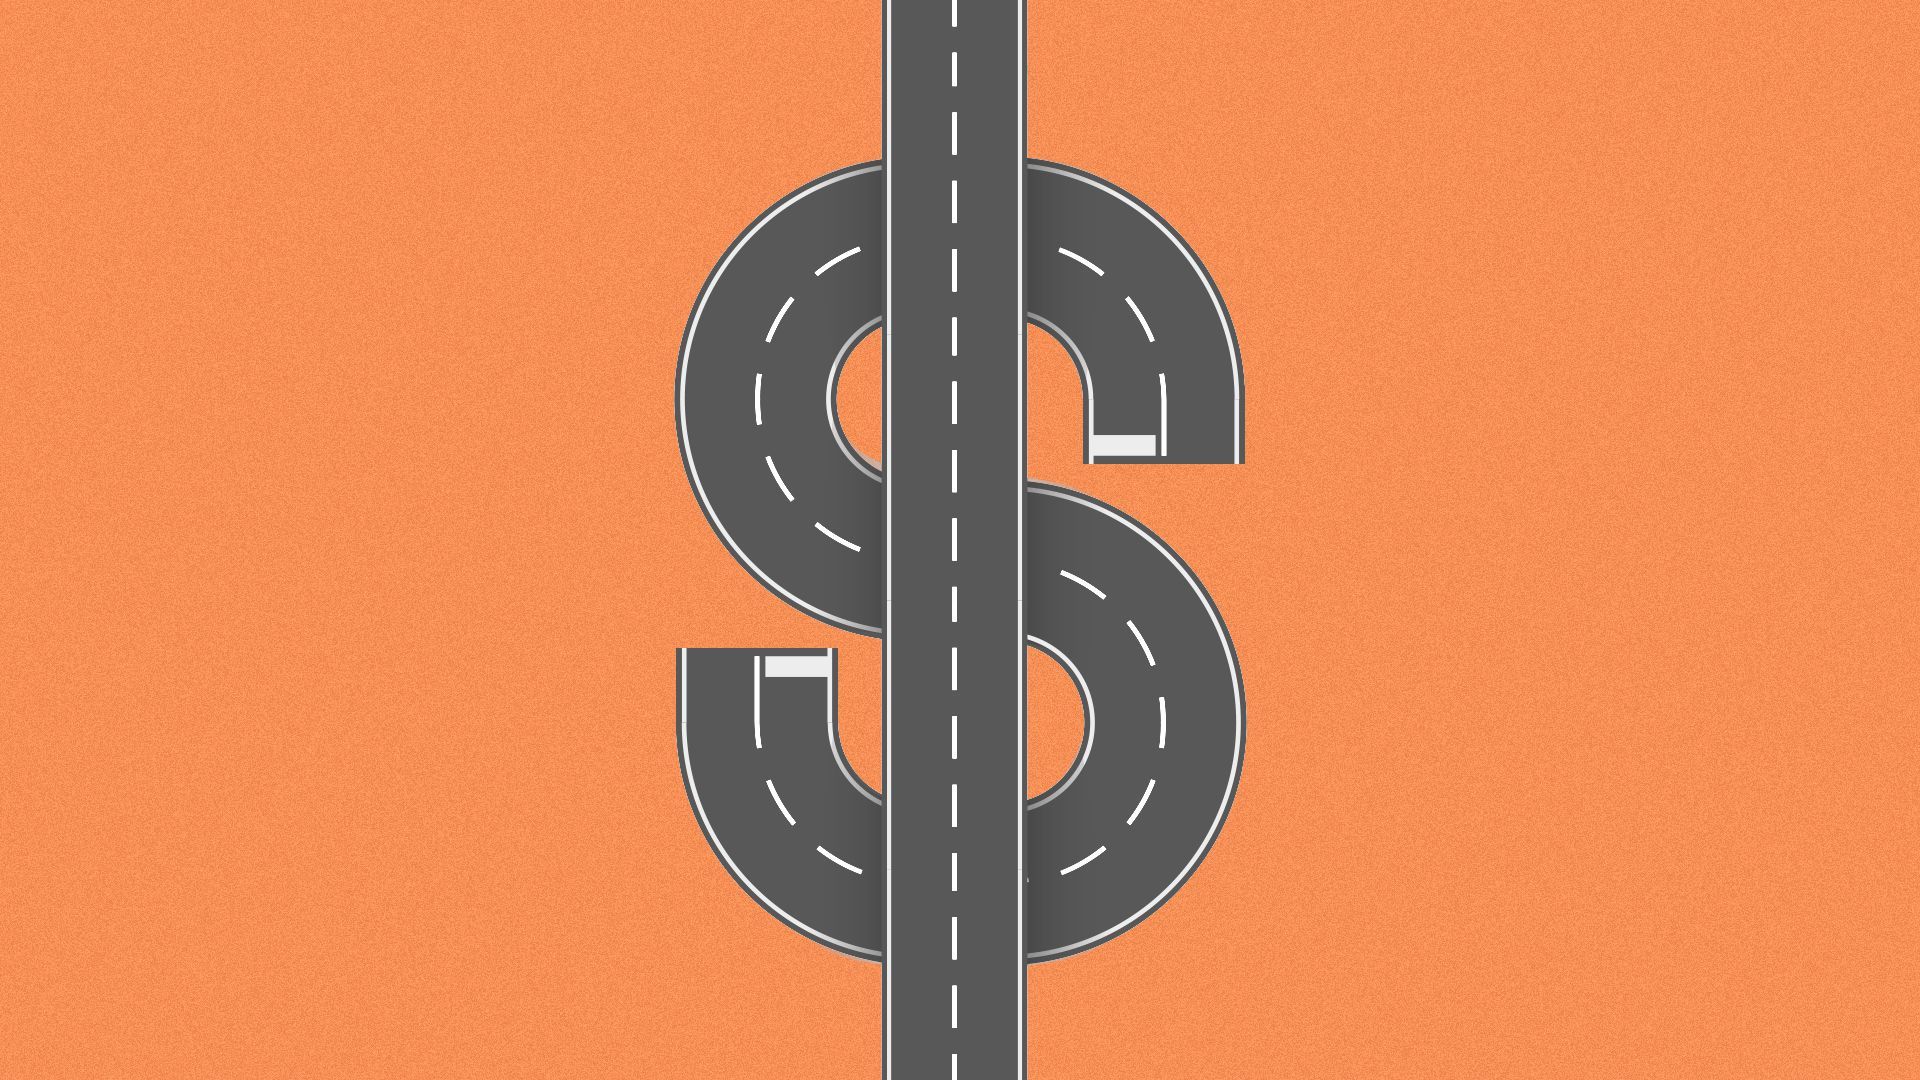 Illustration of a road in the shape of a dollar sign.